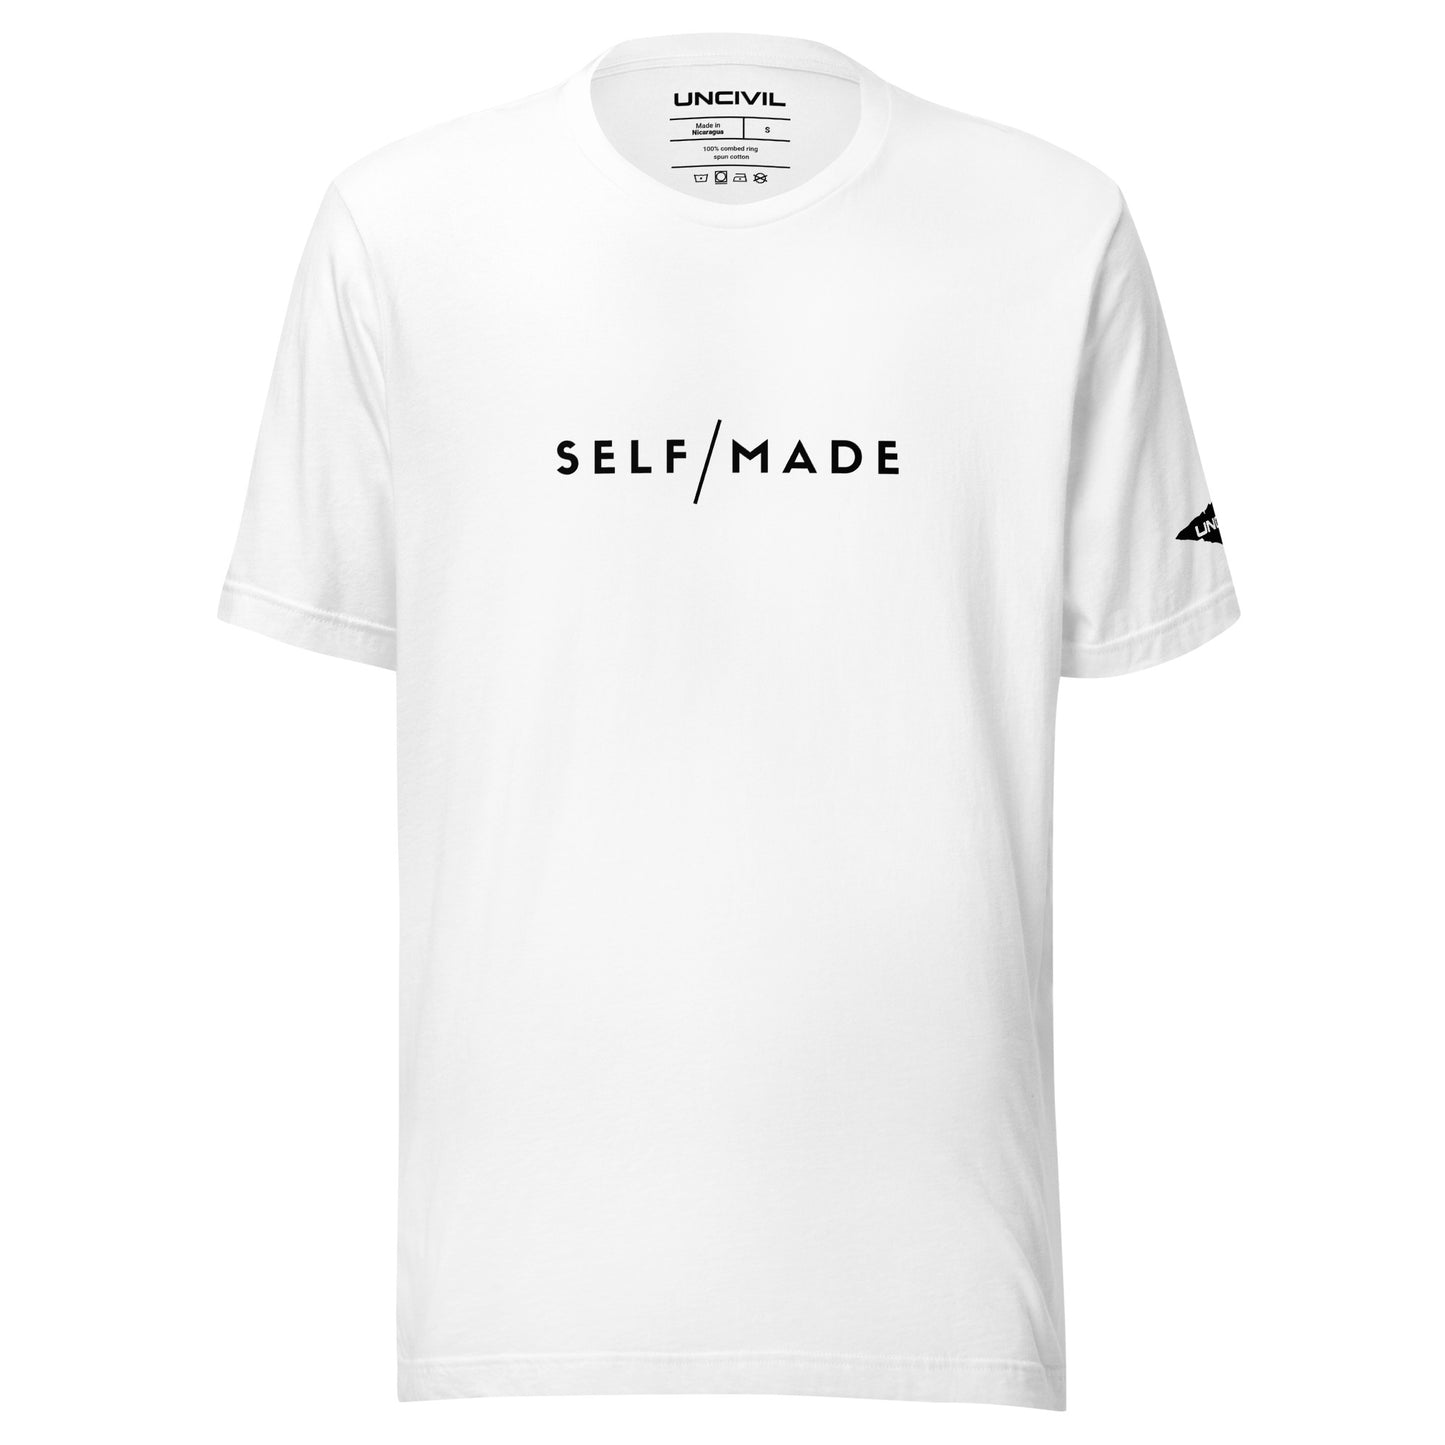 Our Self/Made UNCIVIL lifestyle shirt embodies empowerment and resilience. White unisex shirt.